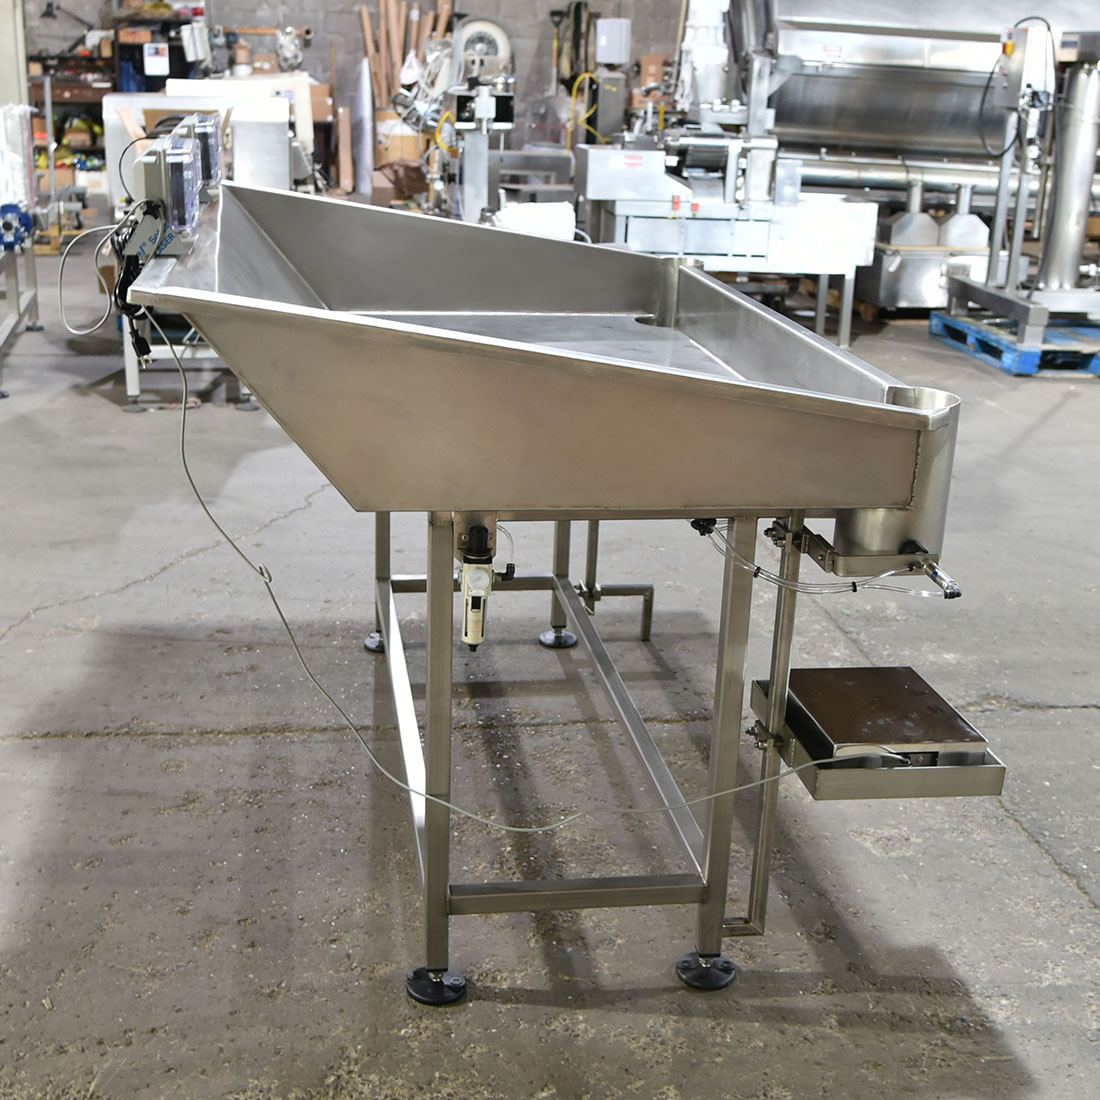 HAND PACK BAG FILLER, 2-station, food grade, stainless steel, net-weigh, fill by weight, in stock new, Alard item Y5693